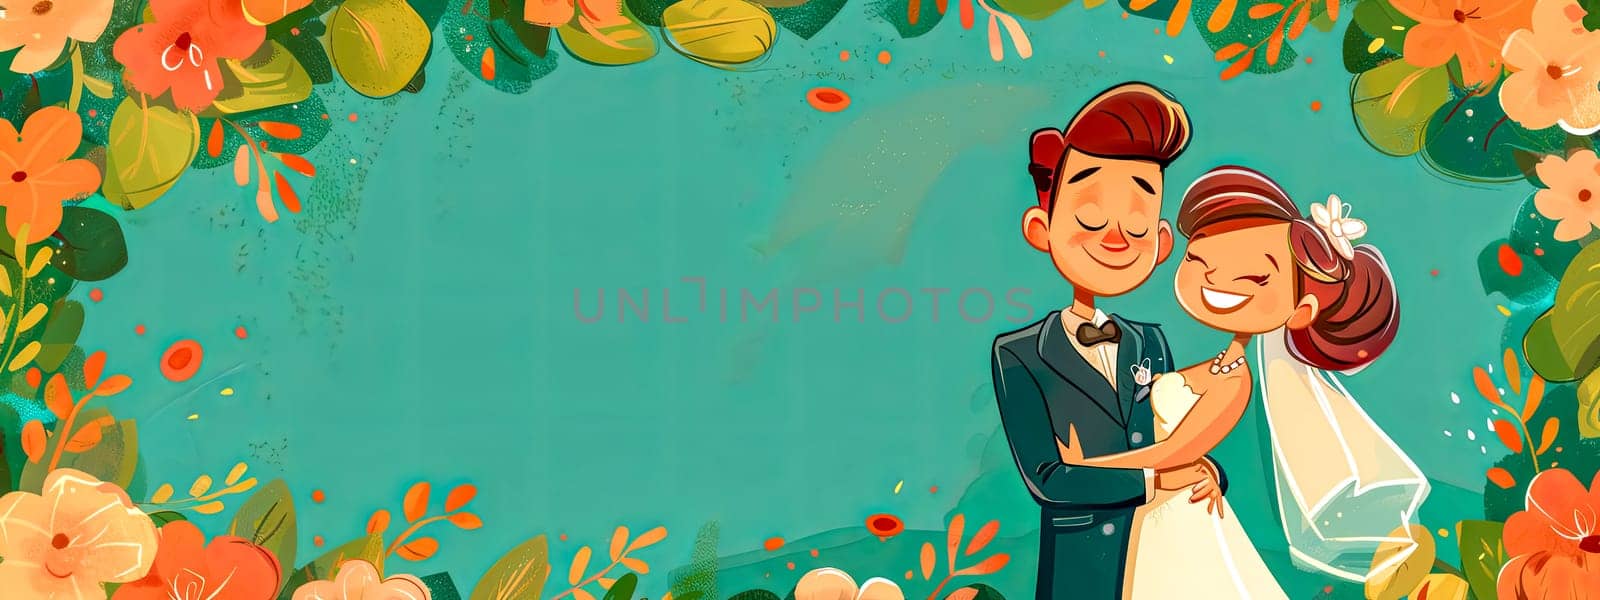 Wedding Couple Embracing Surrounded by Flowers Illustration, copy space